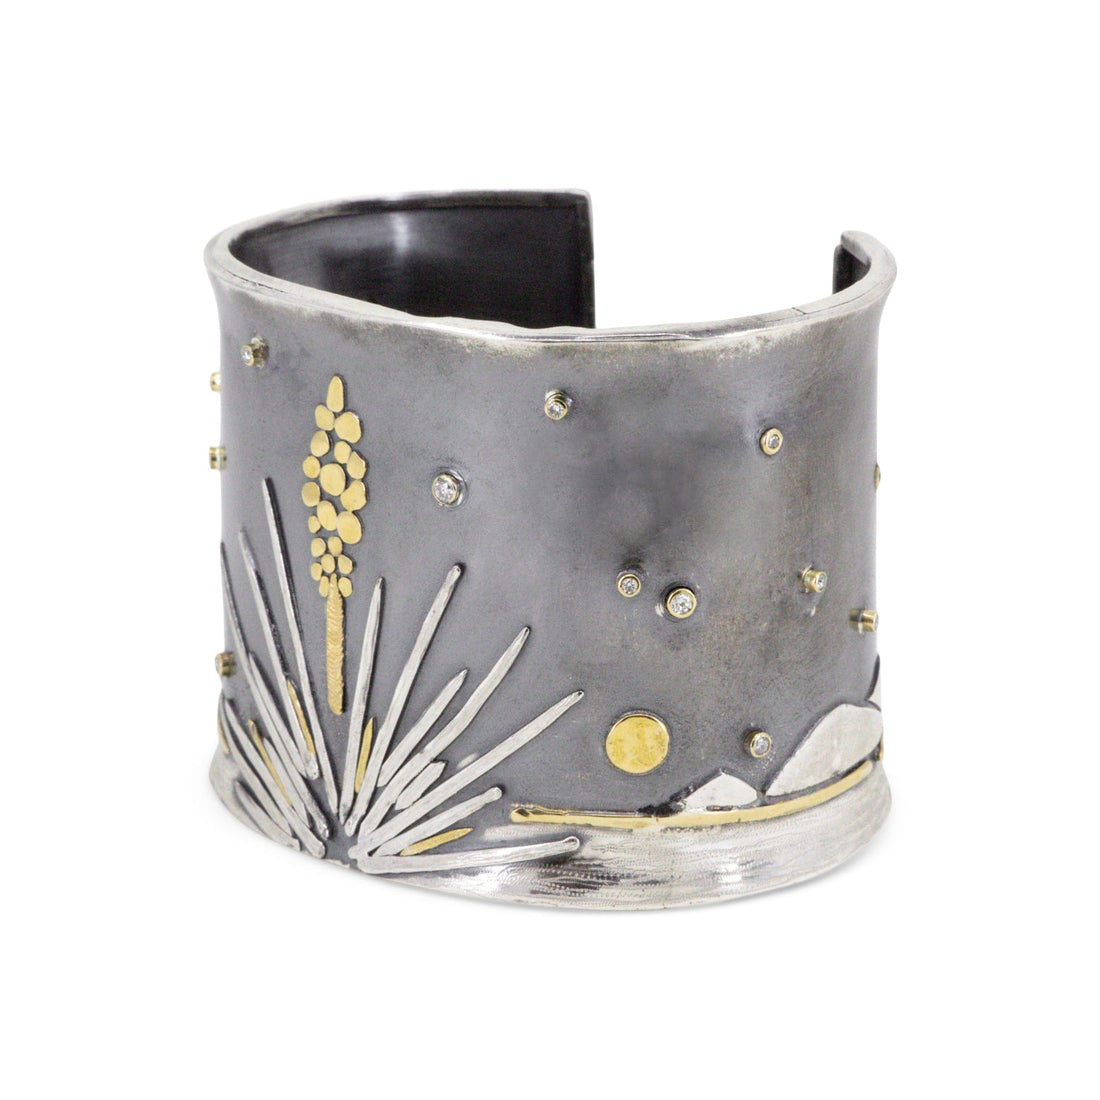 Wide mixed metal statement cuff with desert landscape motif and diamond accents by Erin Cuff Jewelry.